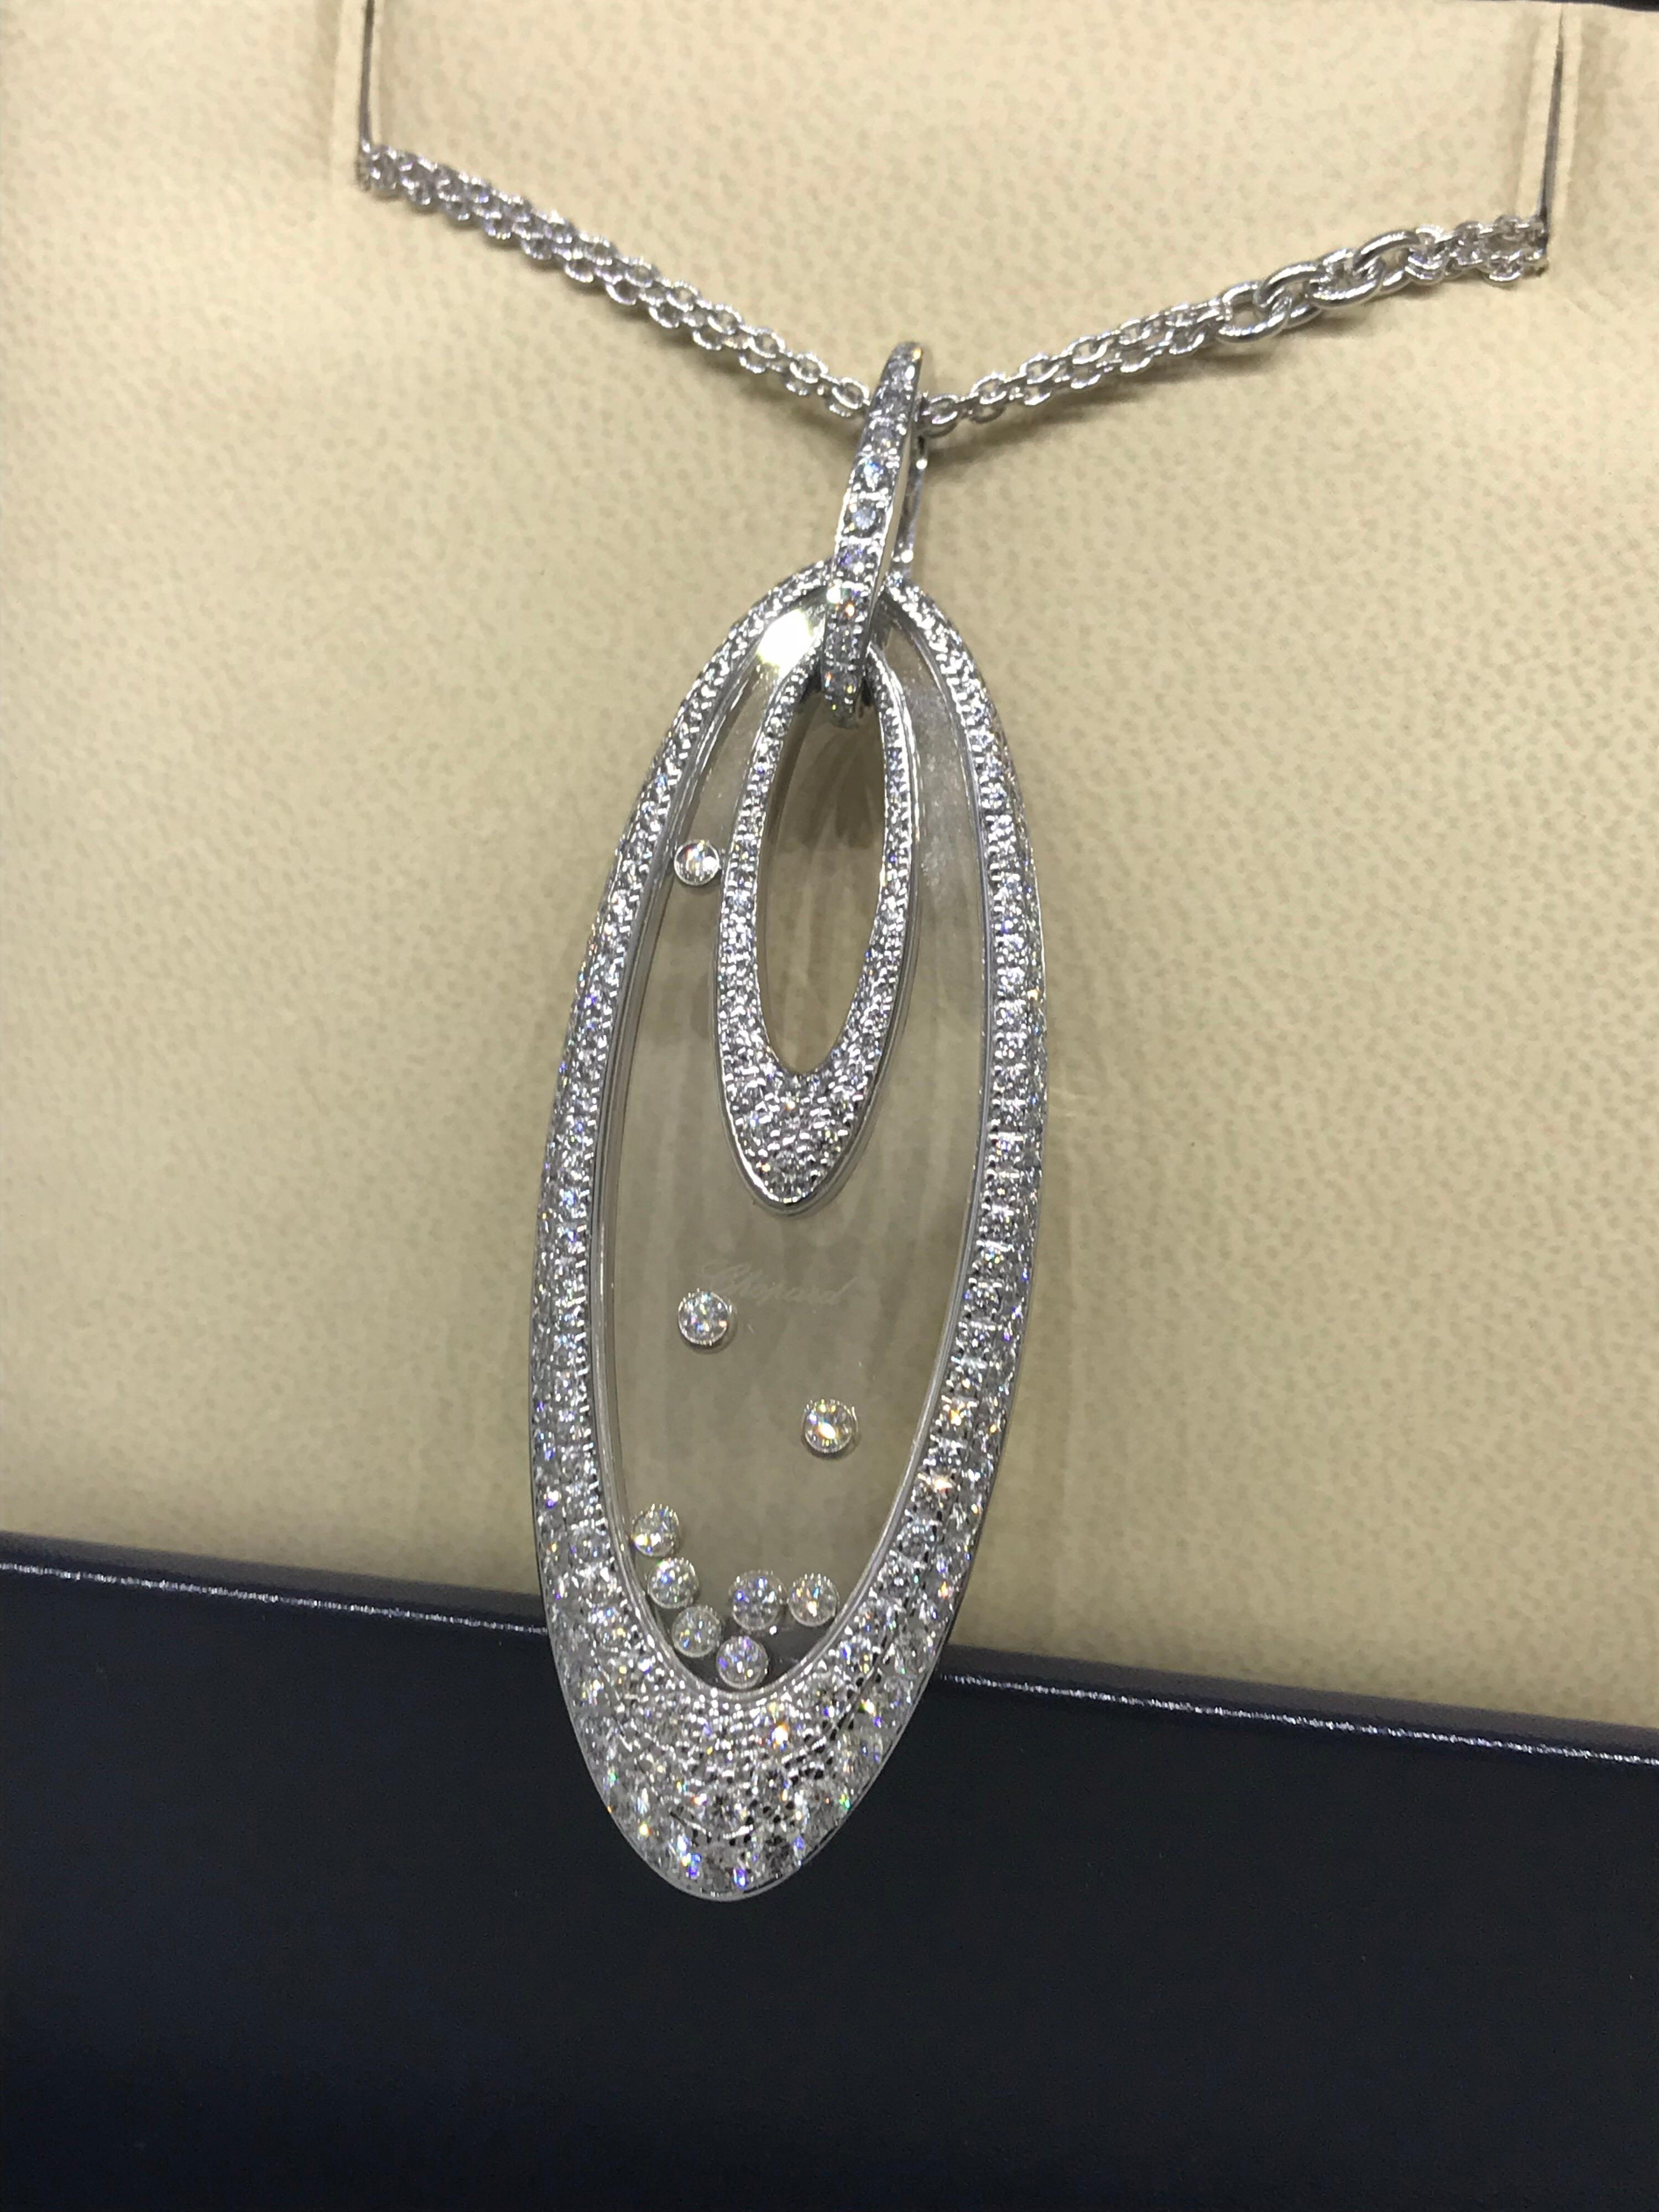 Chopard Happy Diamonds Large Oval Pendant / Necklace

Model Number: 79/7782-1001

100% Authentic

Brand New

Comes with original Chopard box, certificate of authenticity and warranty, and jewels manual

18 Karat White Gold (53.3gr)

224 Diamonds on